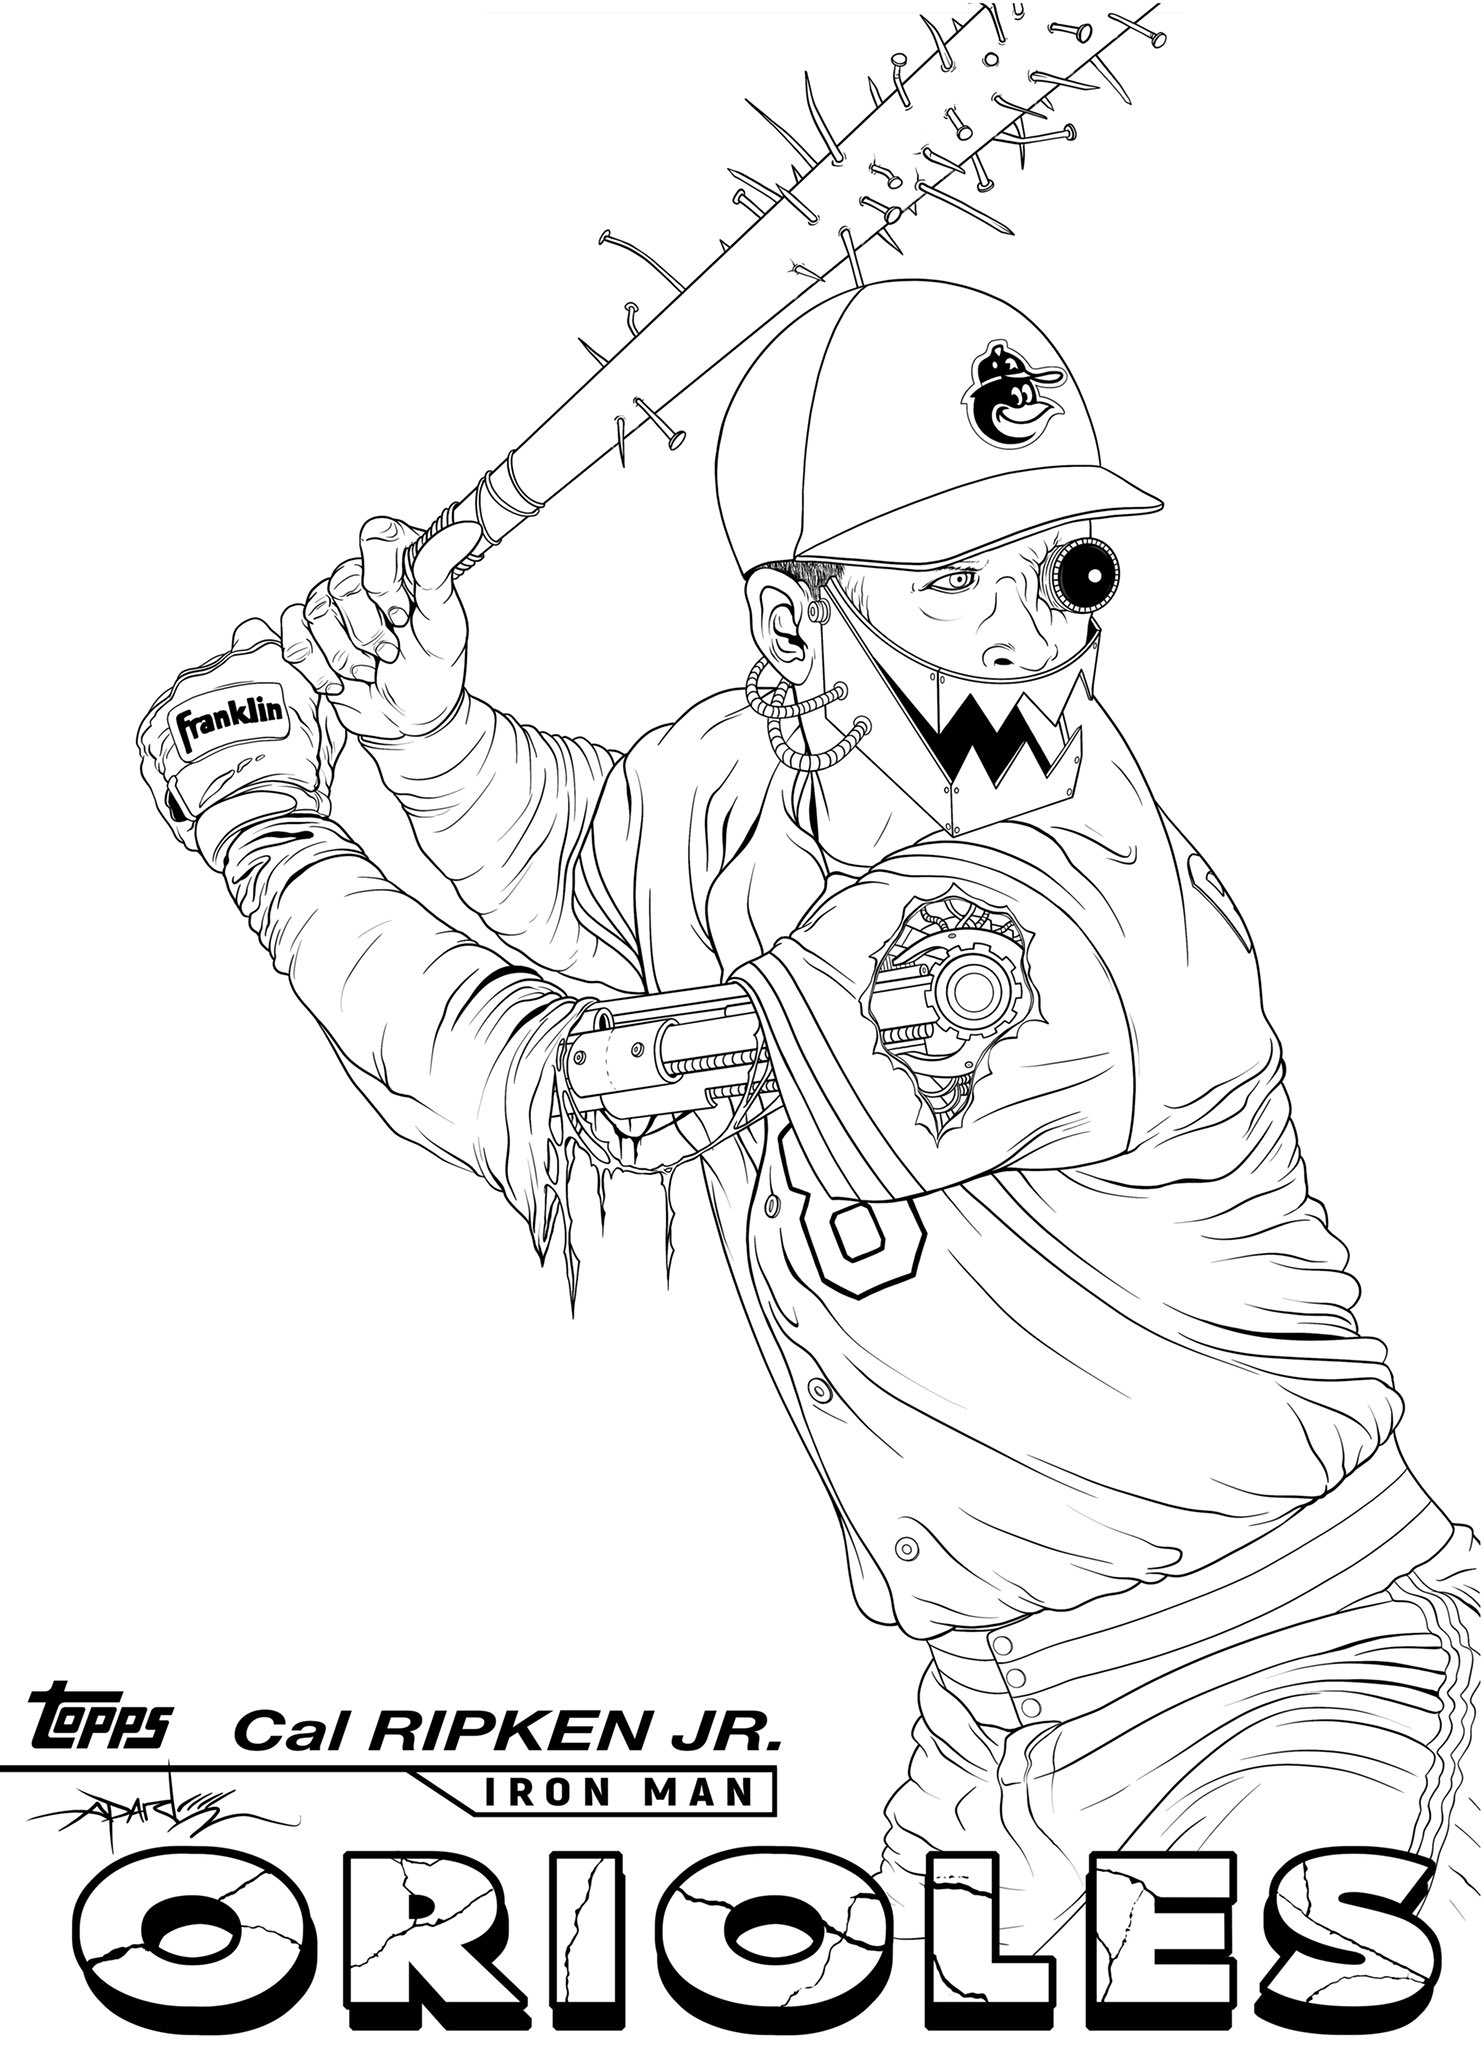 Alex Pardee on X: I added another coloring page to the thread. Cal Ripken  Jr!  / X